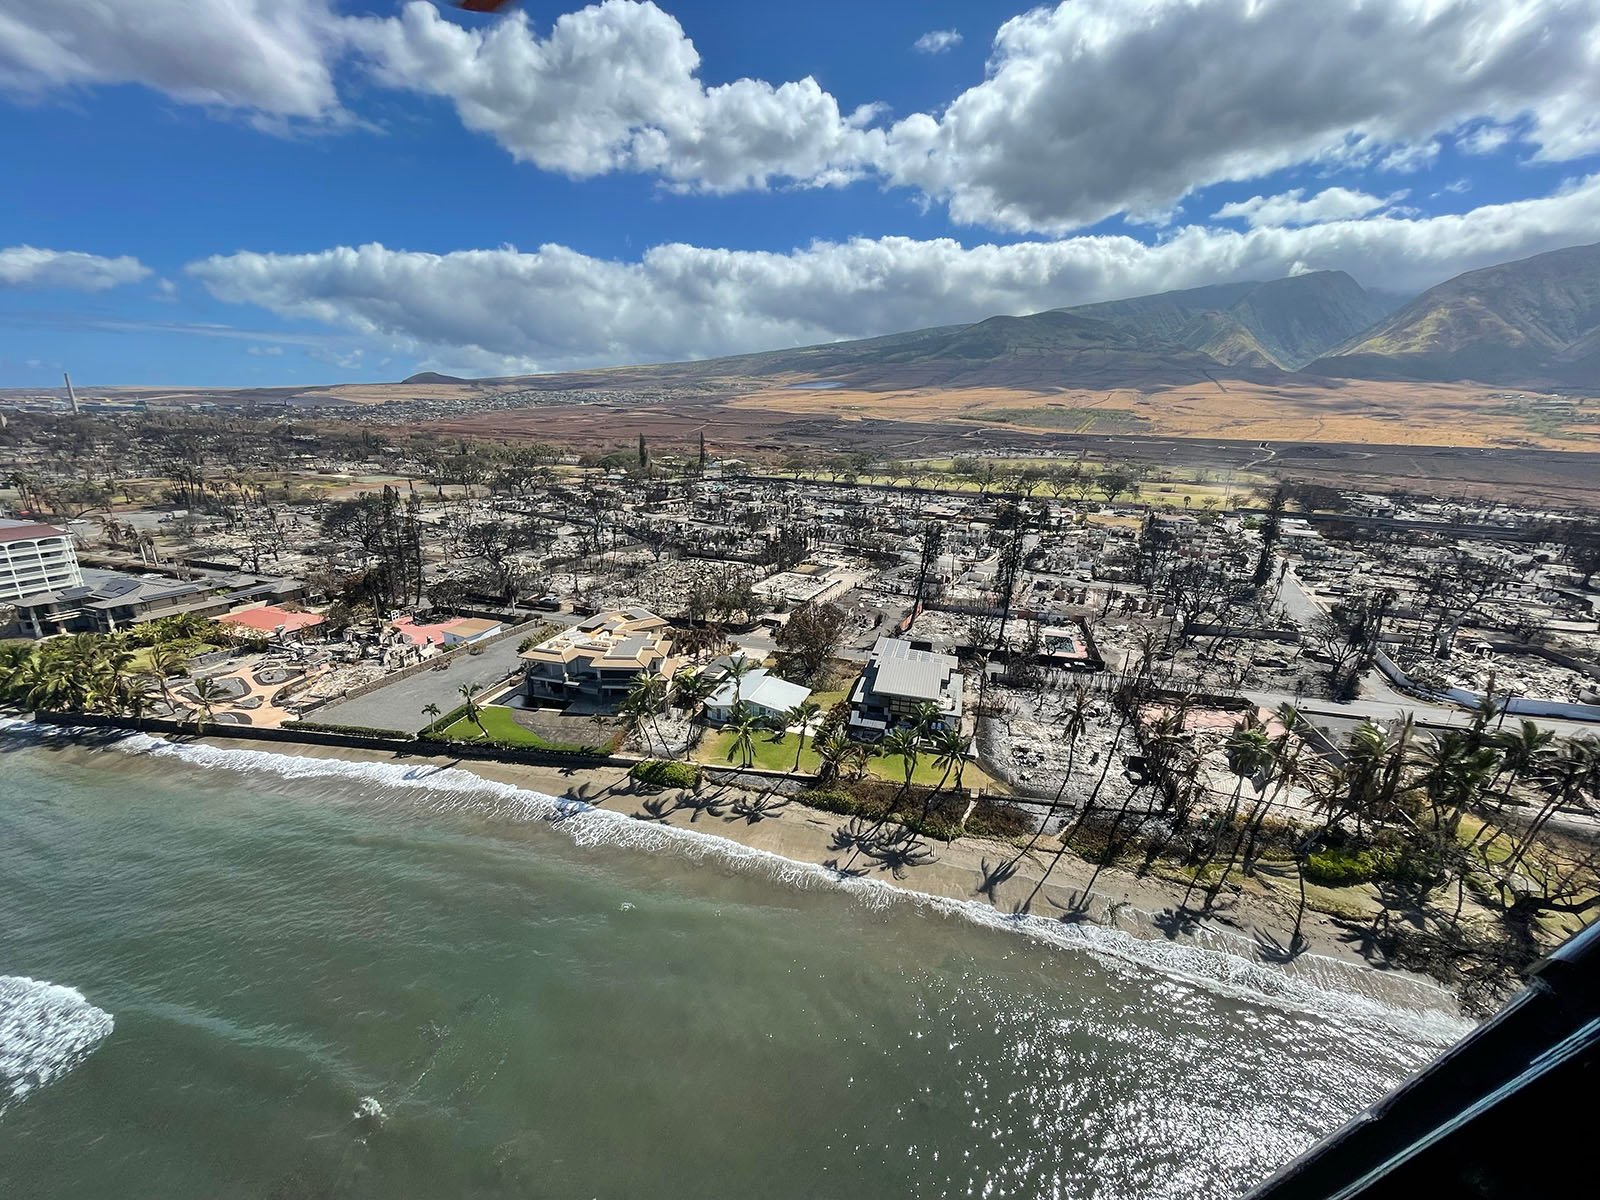 An aerial view of Hawaii after the fires by the water.